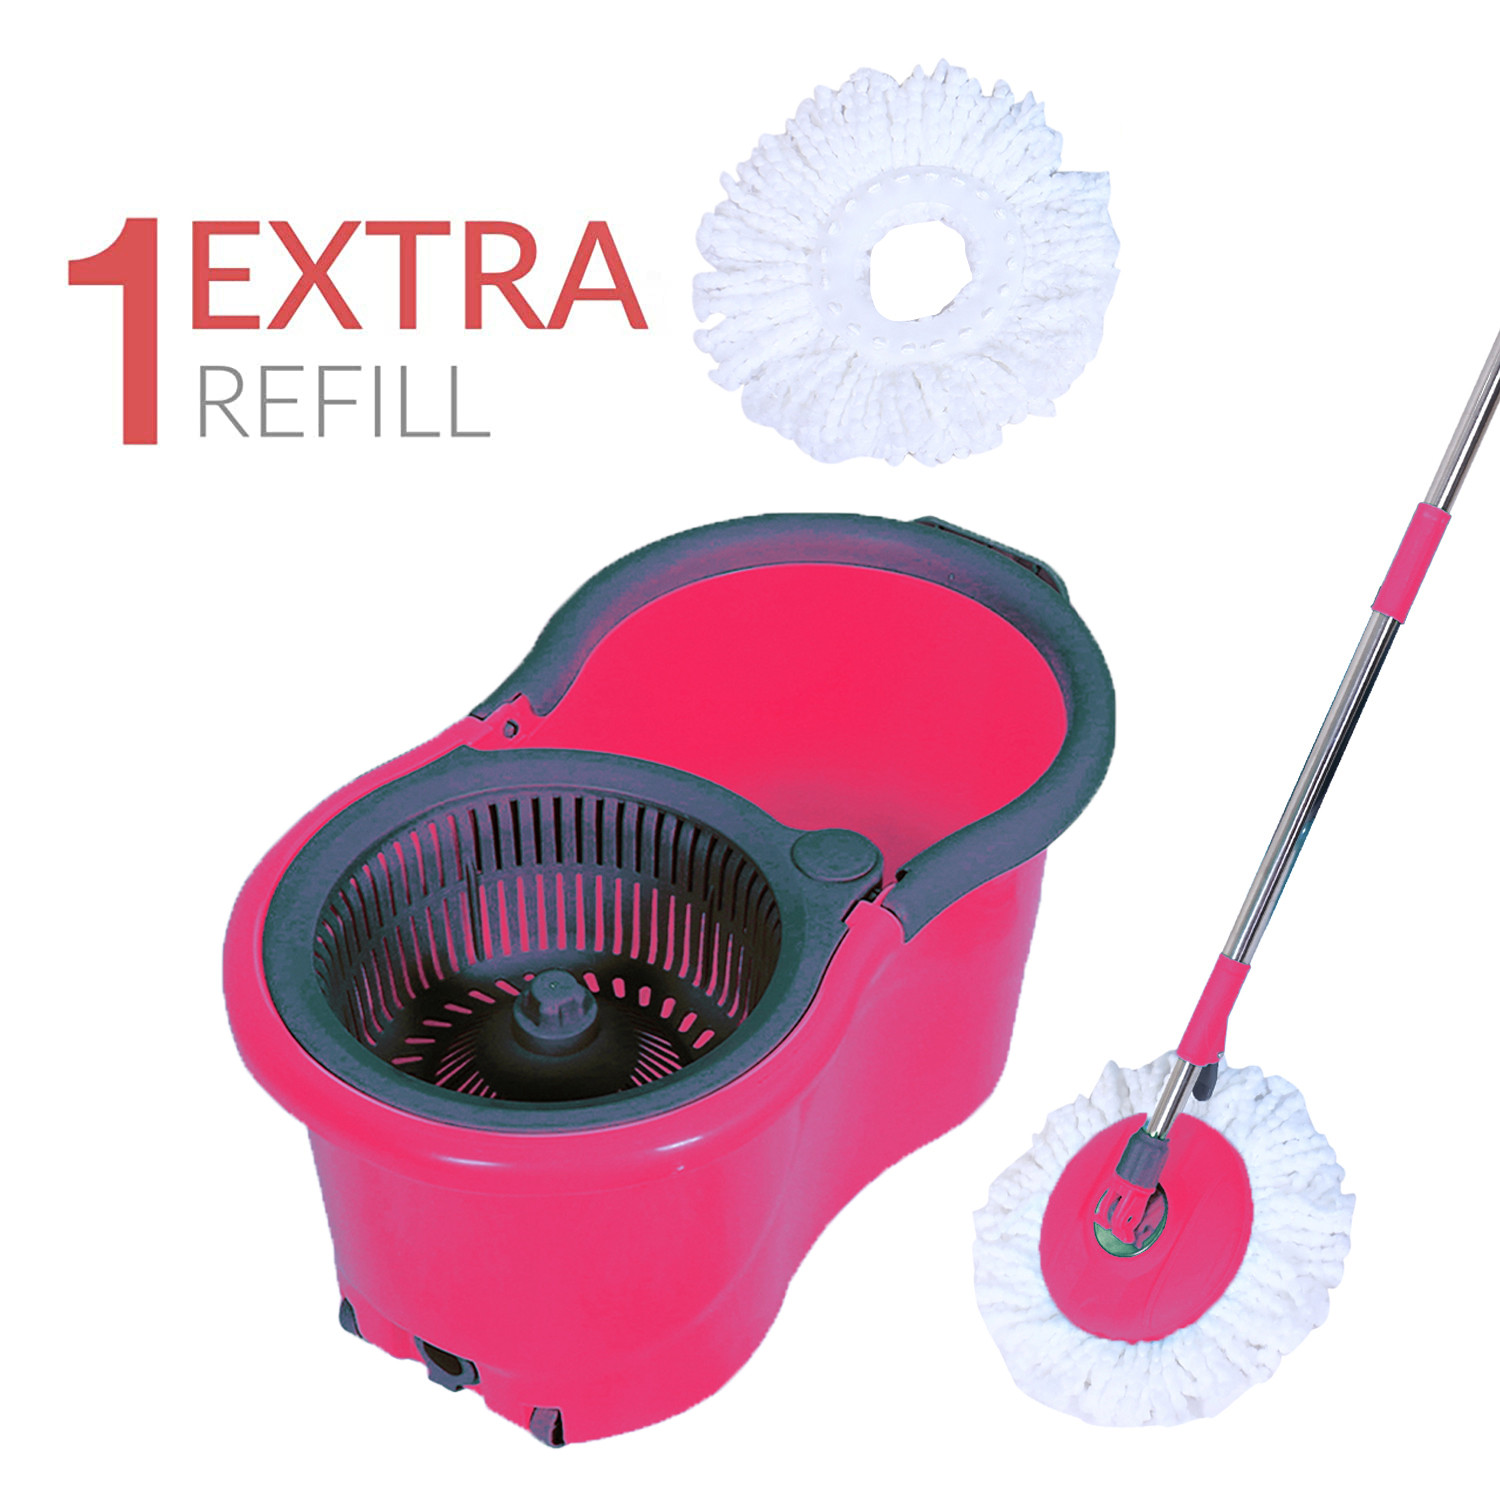 Kuber Industries Plastic Adjustable Mopping Set & 2 Microfiber Head Refill With Wheels Bucket And Auto Fold Handle For Floor Cleaning (Pink)